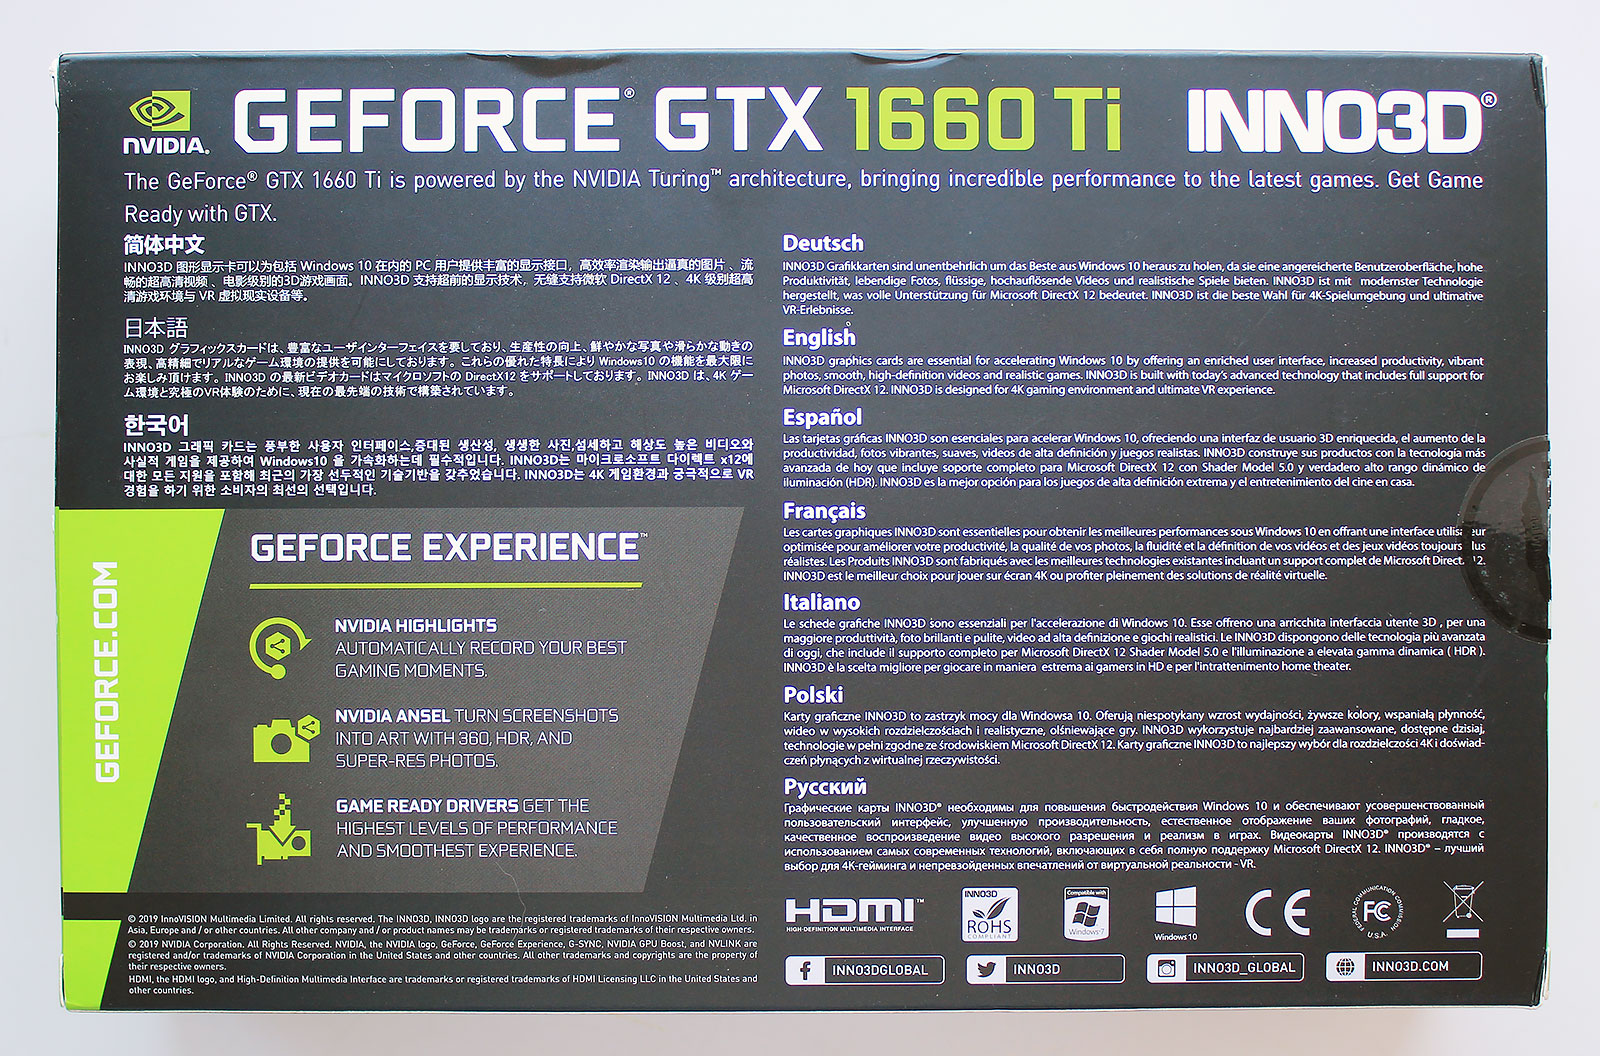 Be the Envy of Your Friends with NVIDIA GeForce 1660 Ti